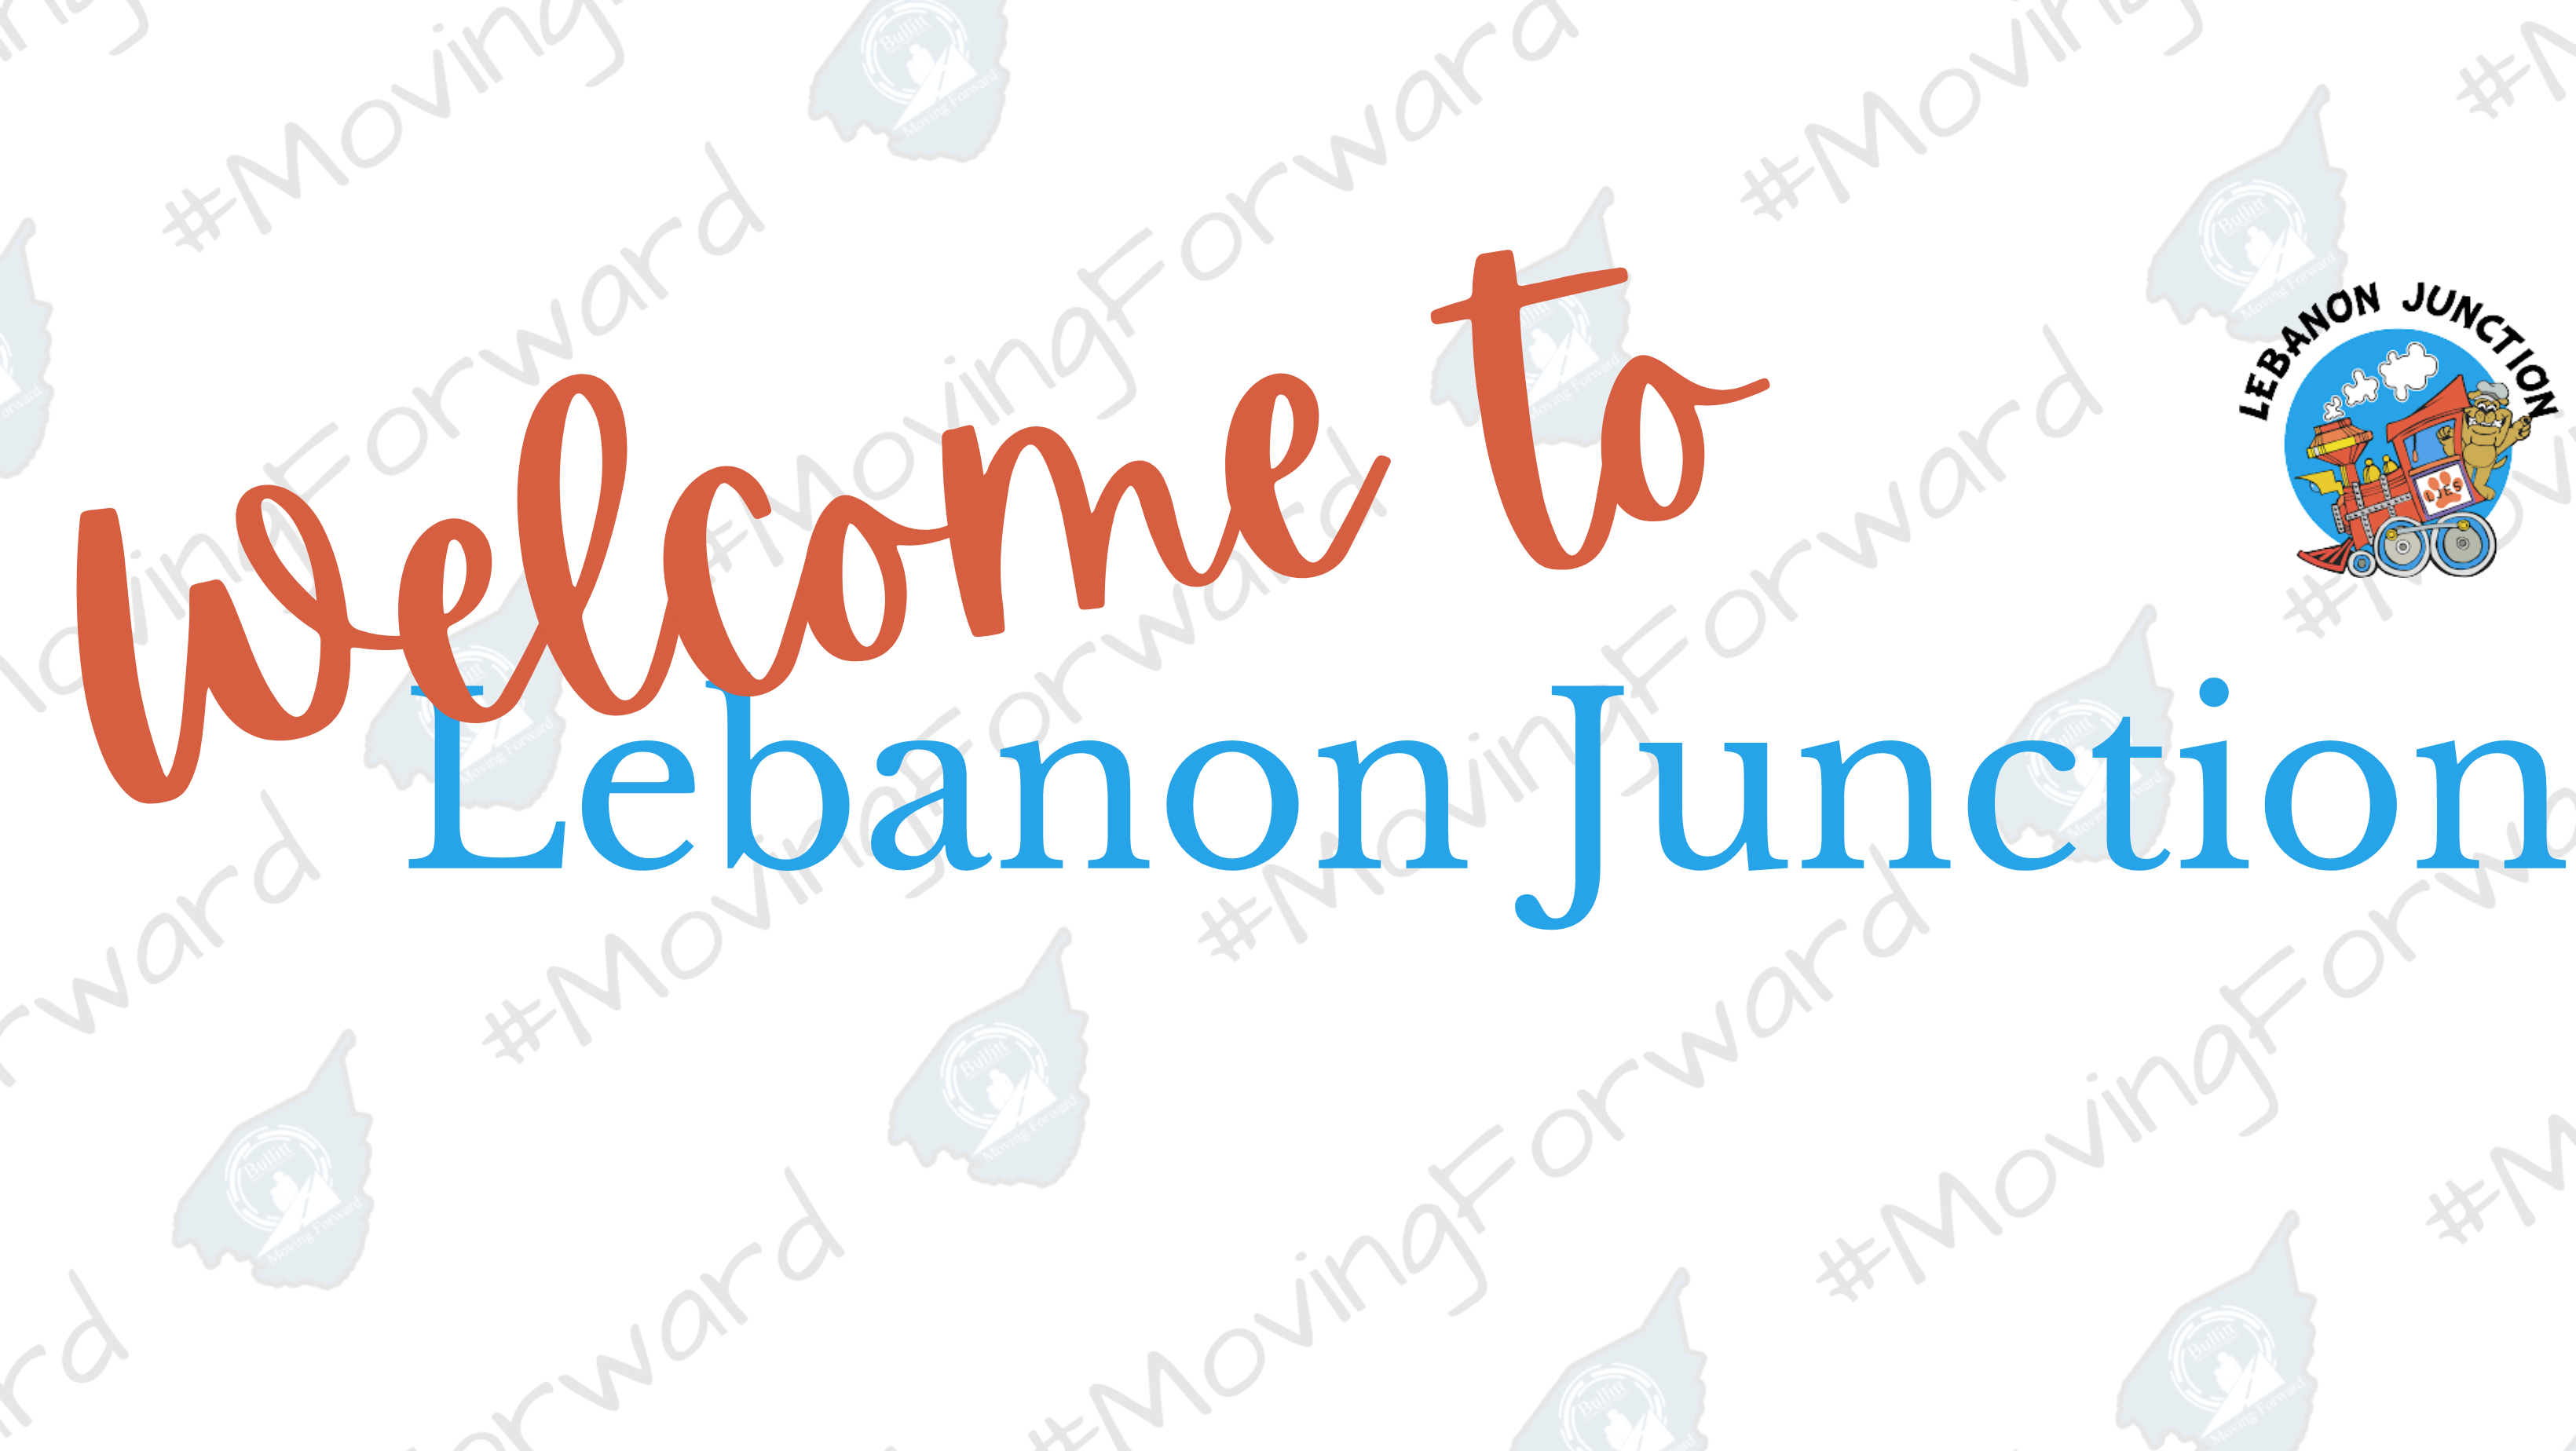 Welcome to Lebanon Junction